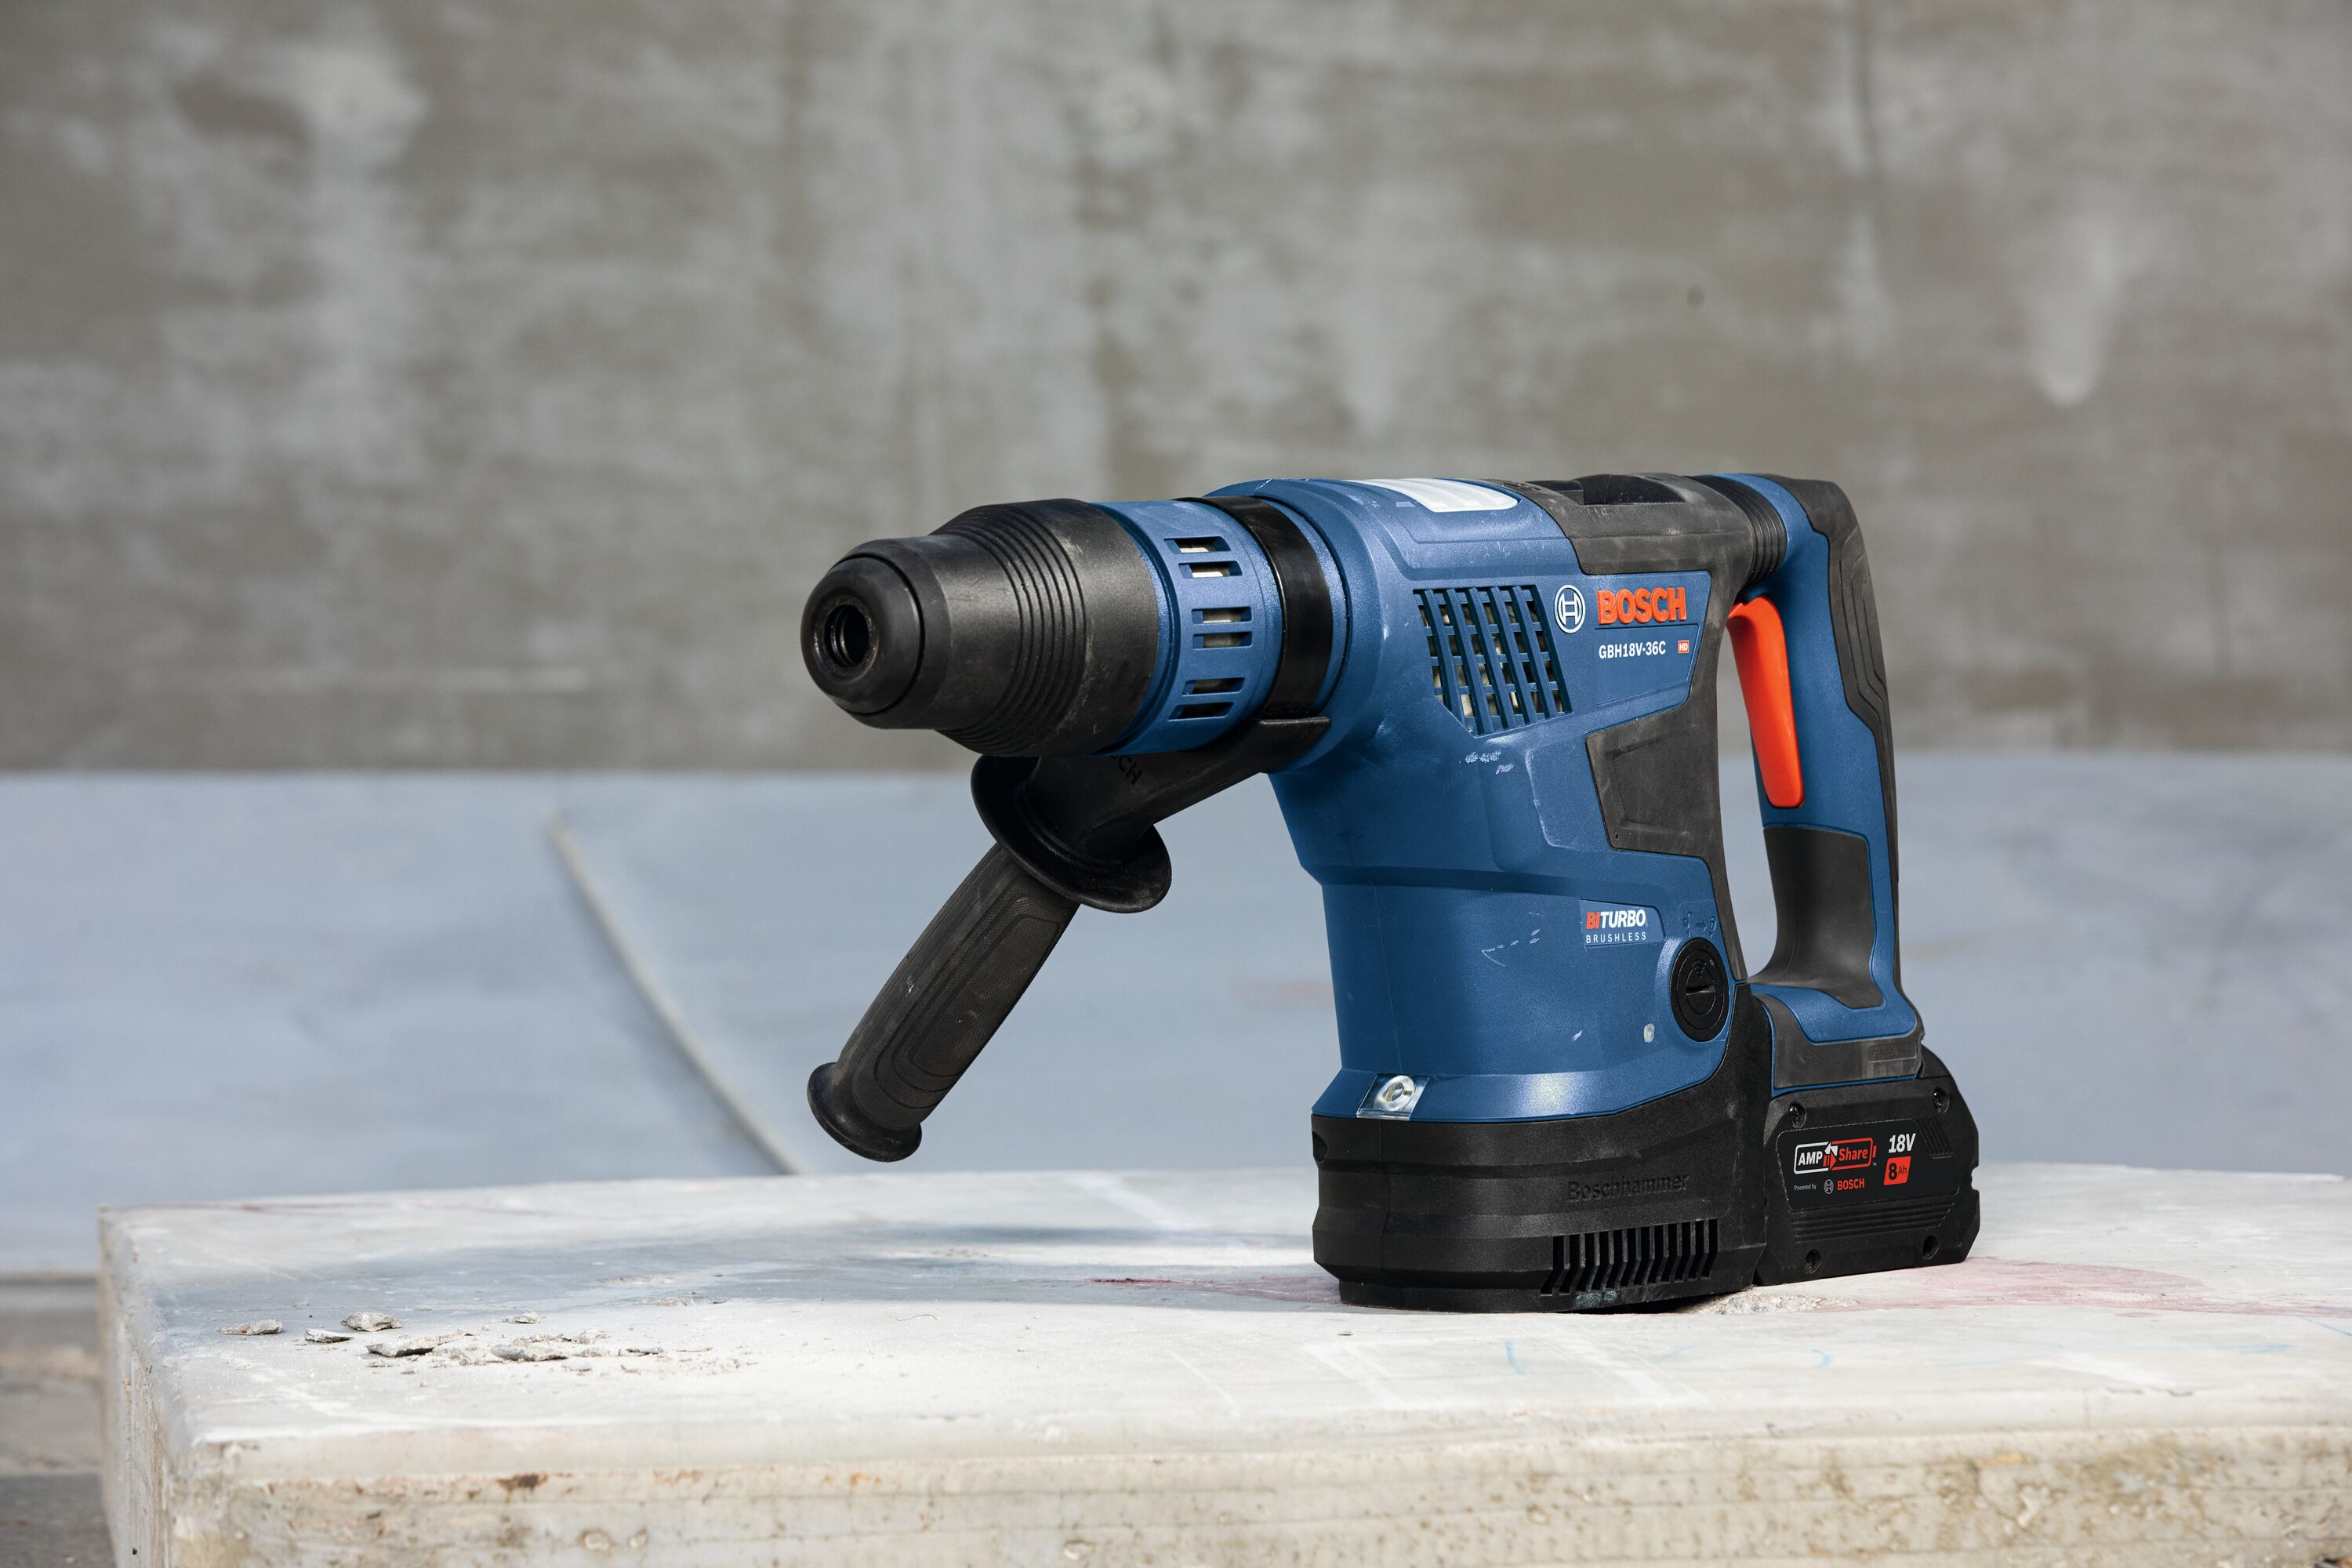 Bosch Rotary 1-9/16-in Sds-max Cordless (Bare Variable 18-volt Drill in PROFACTOR Tool) at department Drills Hammer the Speed Hammer 8-Amp Rotary